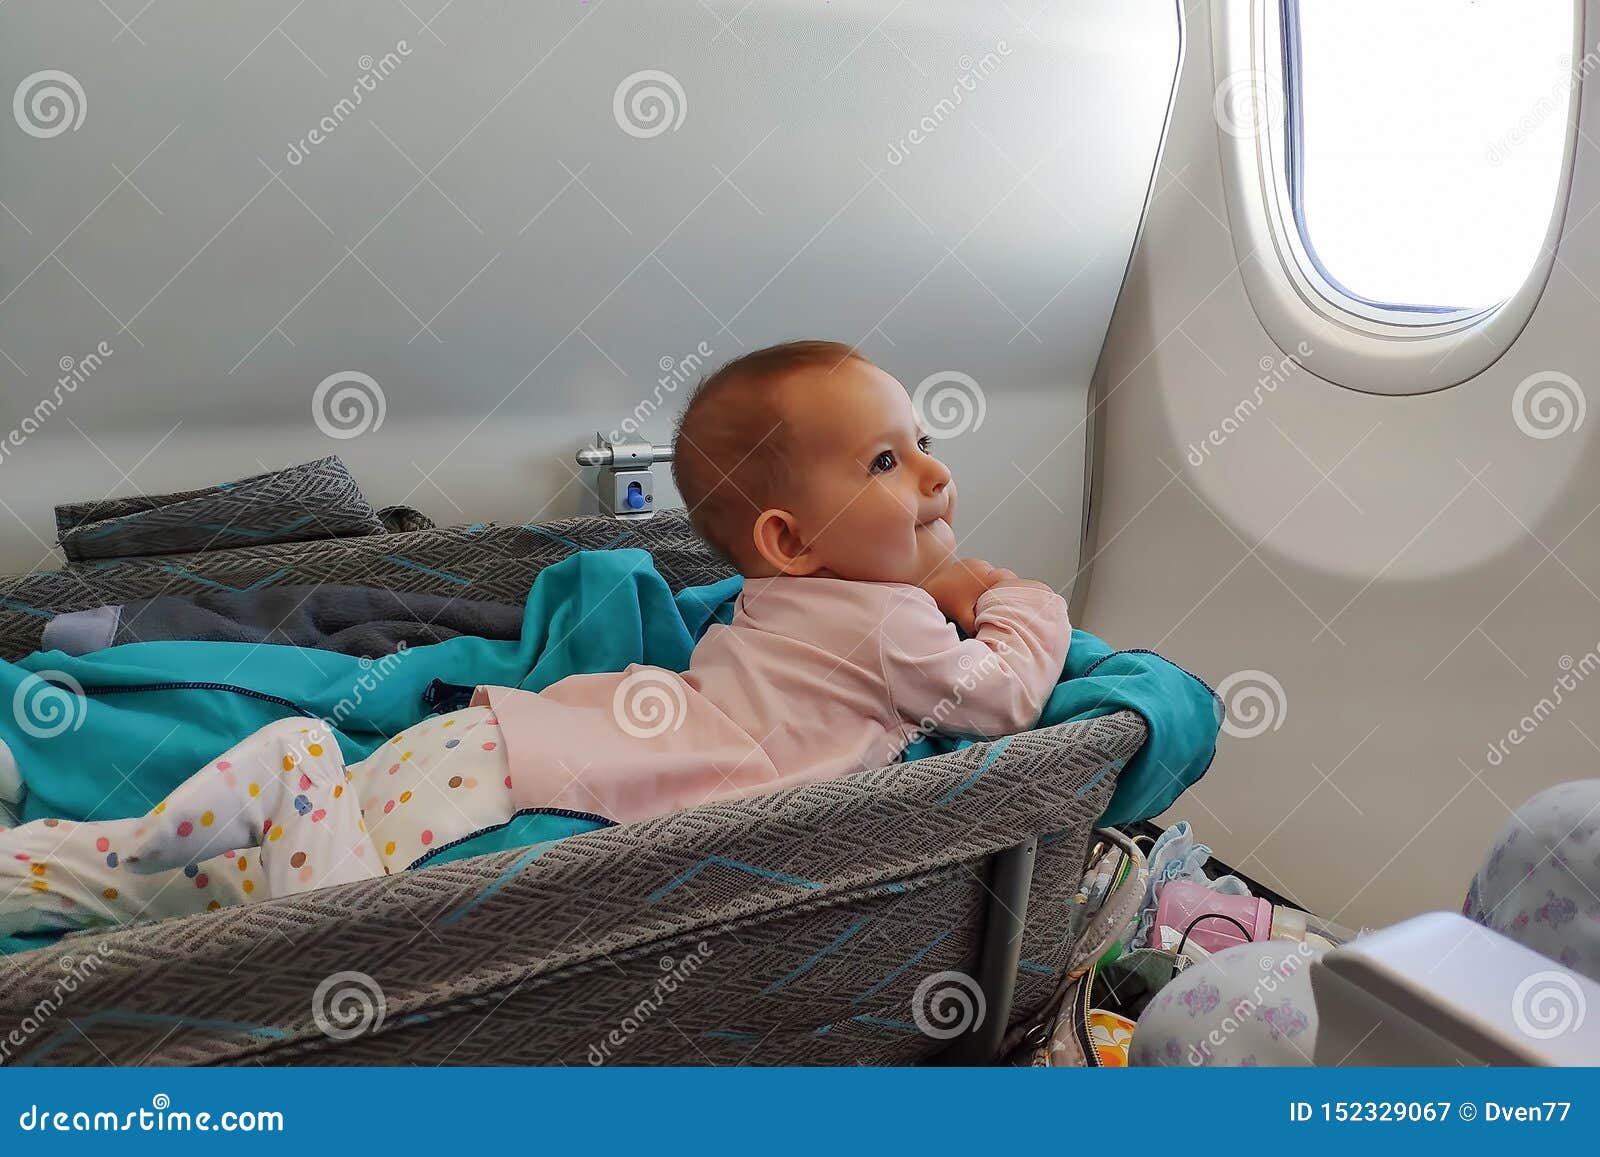 Happy Infant Lyes in Bassinet in Airplane at His Stomach. First Flight of the Baby, she is but Teething Stock Image - Image of passenger, plane: 152329067